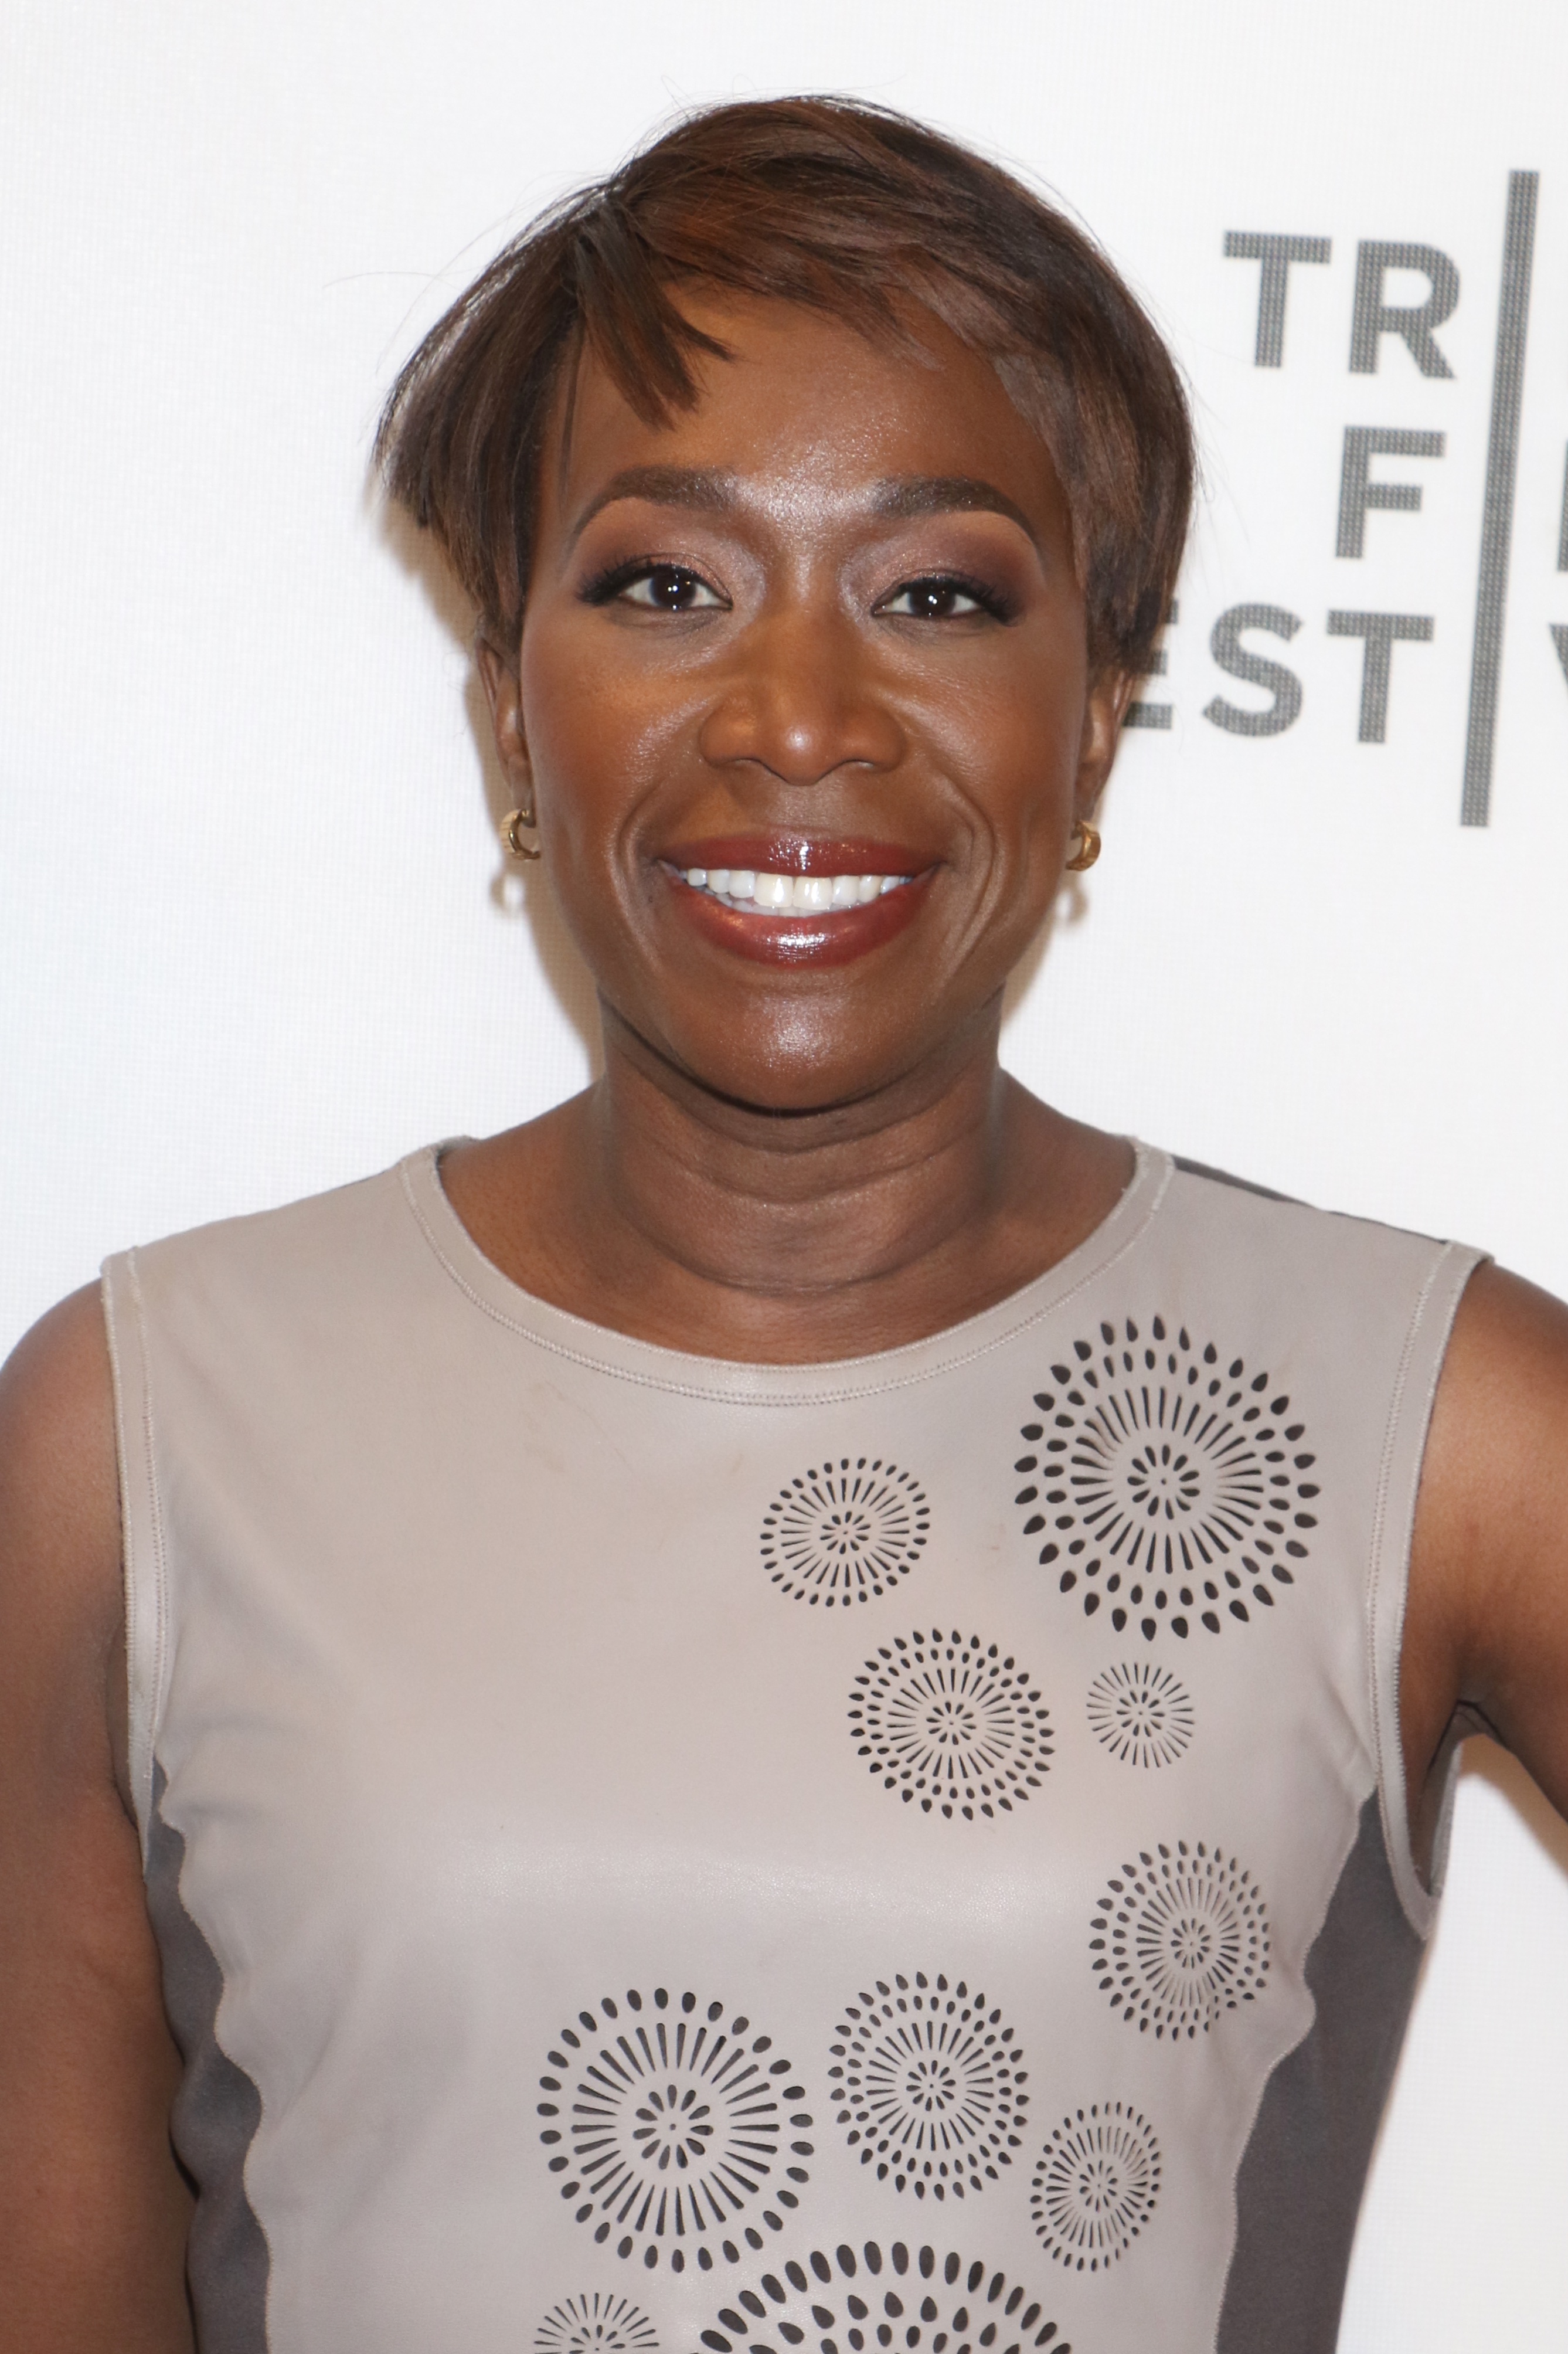 <p>In July 2020, Joy Reid became cable's first Black female primetime anchor when she took over Chris Matthews' 7 p.m. slot on MSNBC as the host of "The ReidOut," which is based in Washington, D.C. "I'm thrilled to have Joy on five nights a week," said MSNBC President Phil Griffin. "She's thoughtful and brings so much depth to her reporting. She's made for this moment."</p>